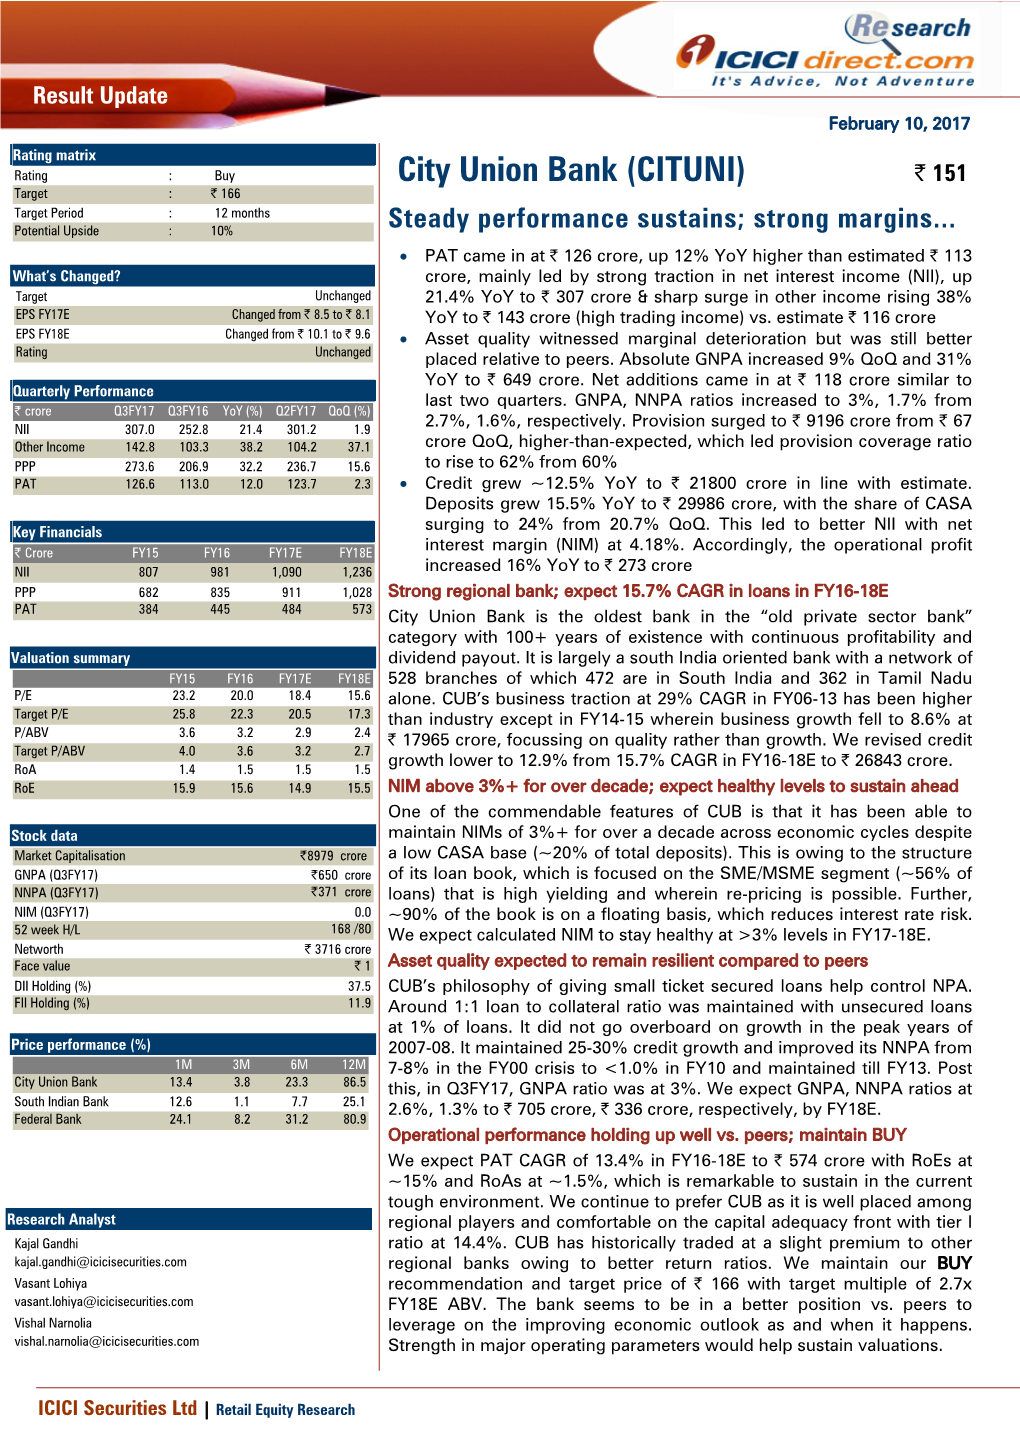 City Union Bank (CITUNI) | 151 Target : | 166 Target Period : 12 Months Steady Performance Sustains; Strong Margins